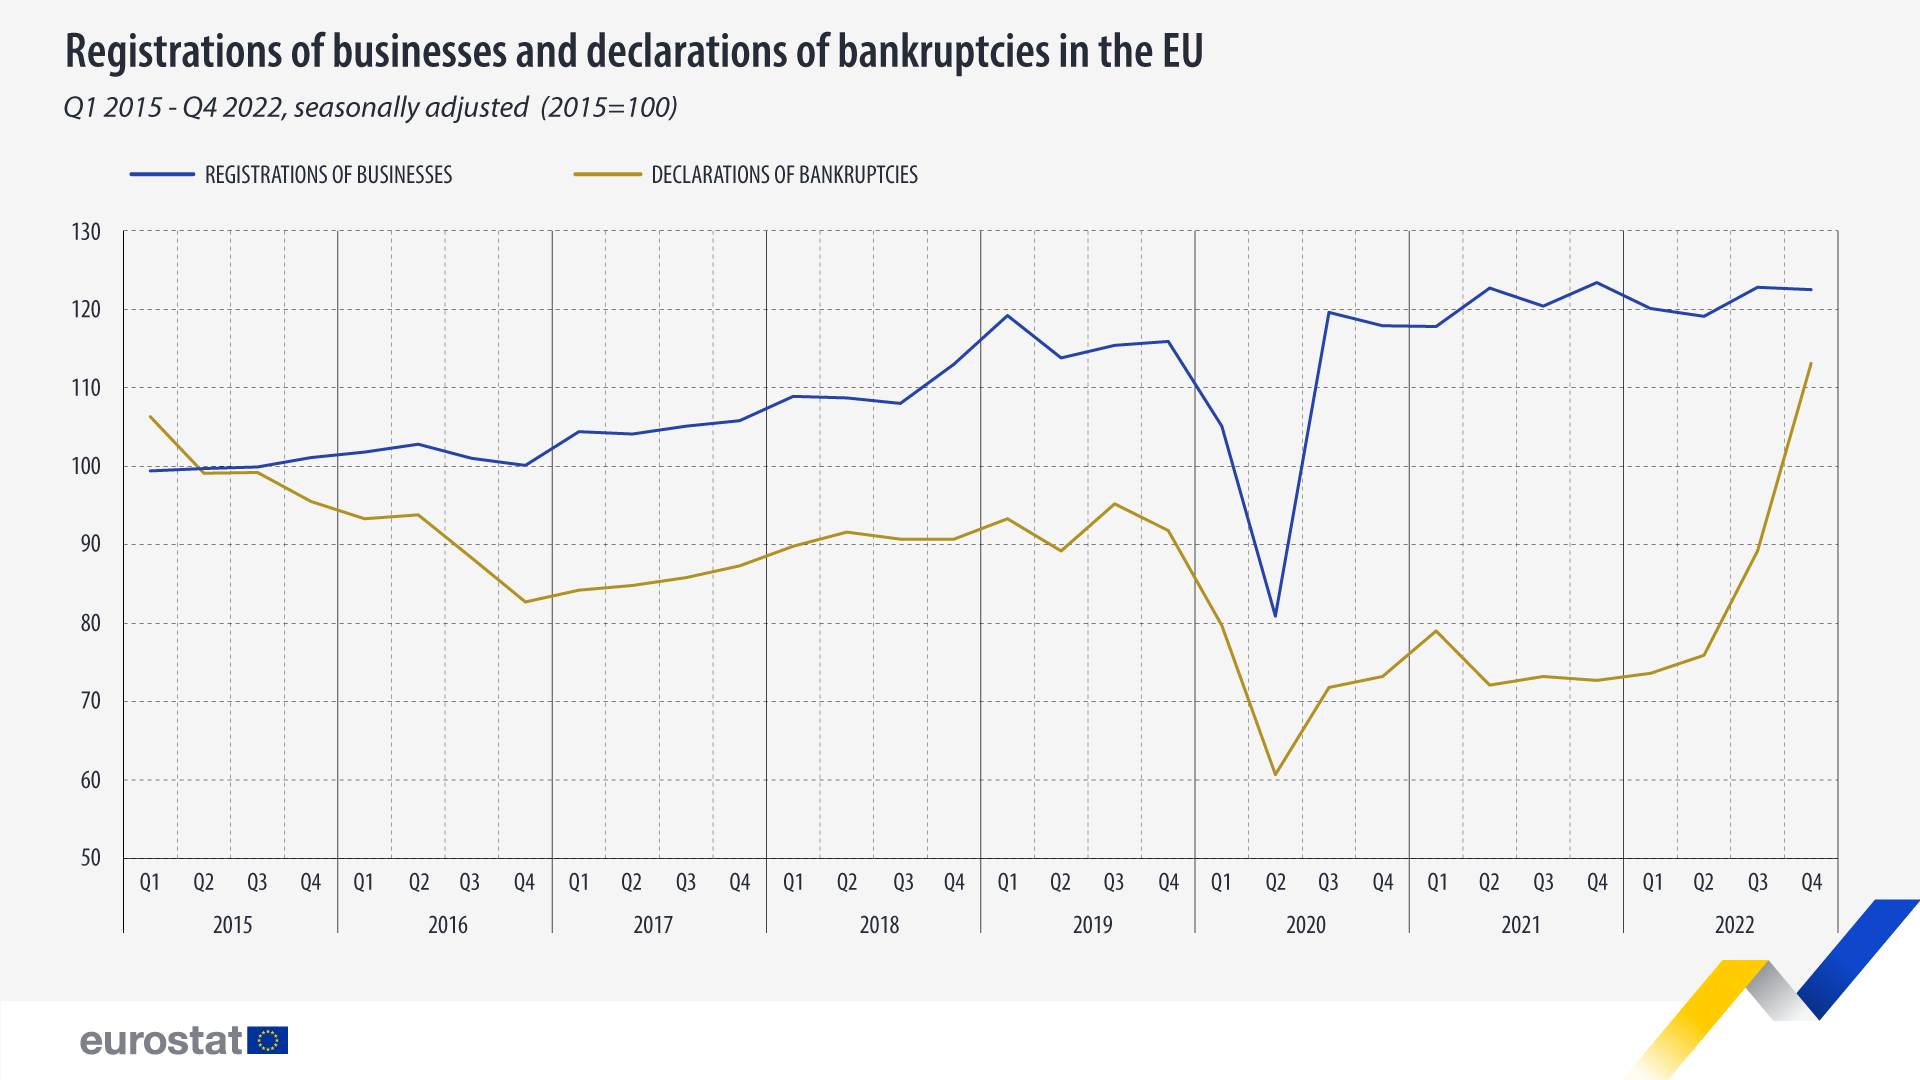 Line graph: Registrations of business an declarations of bankruptcies in the EU, seasonally adjusted, 2015=100, Q1 2015-Q4 2022 